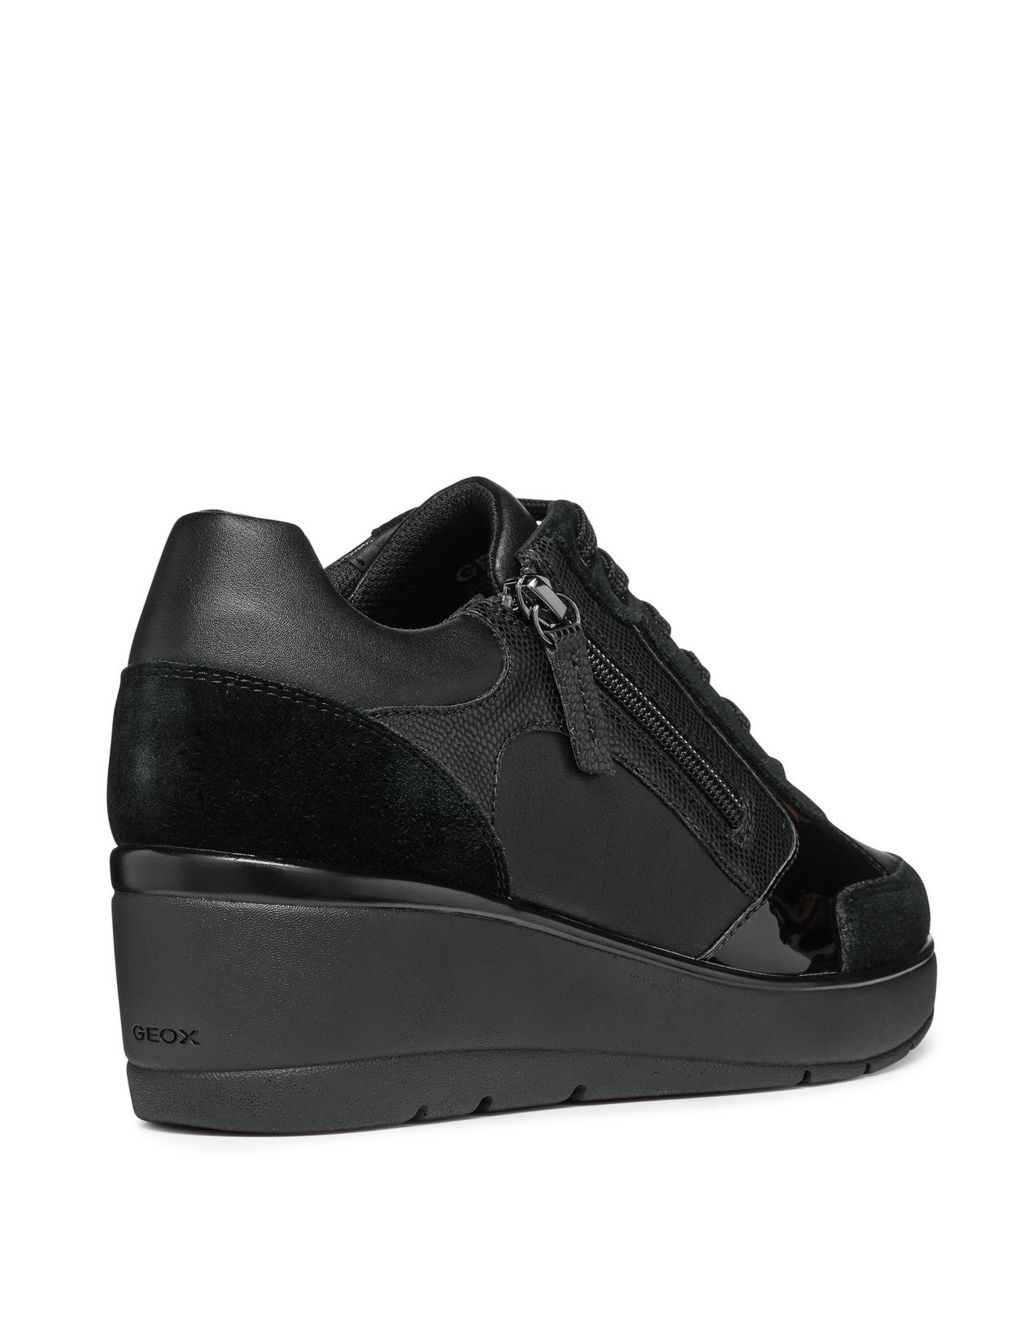 Leather Lace Up Wedge Heel Trainers image 4